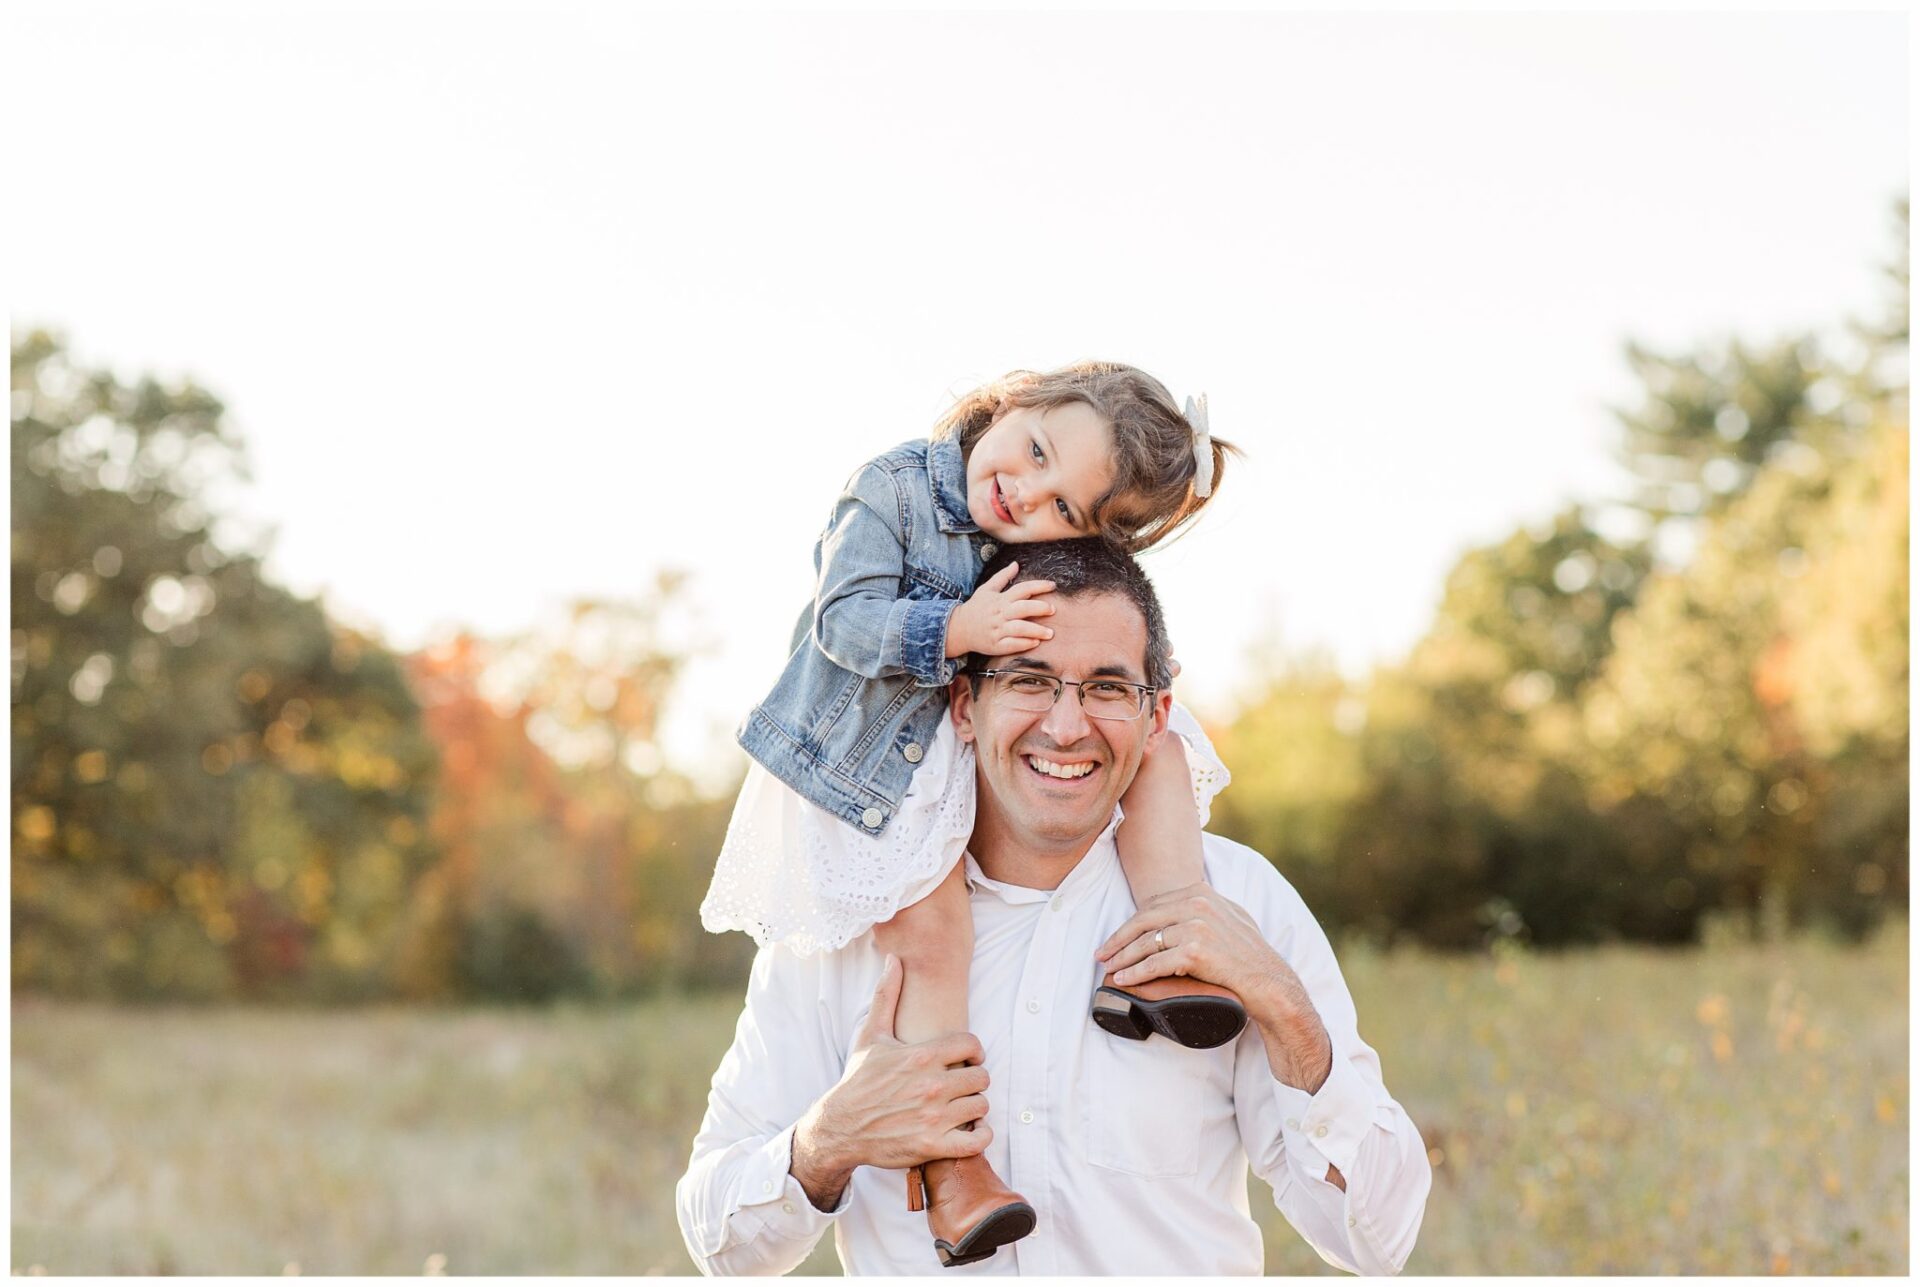 photo of Dad with daughter on his shoulders in field during Natick Massachusetts family photo session